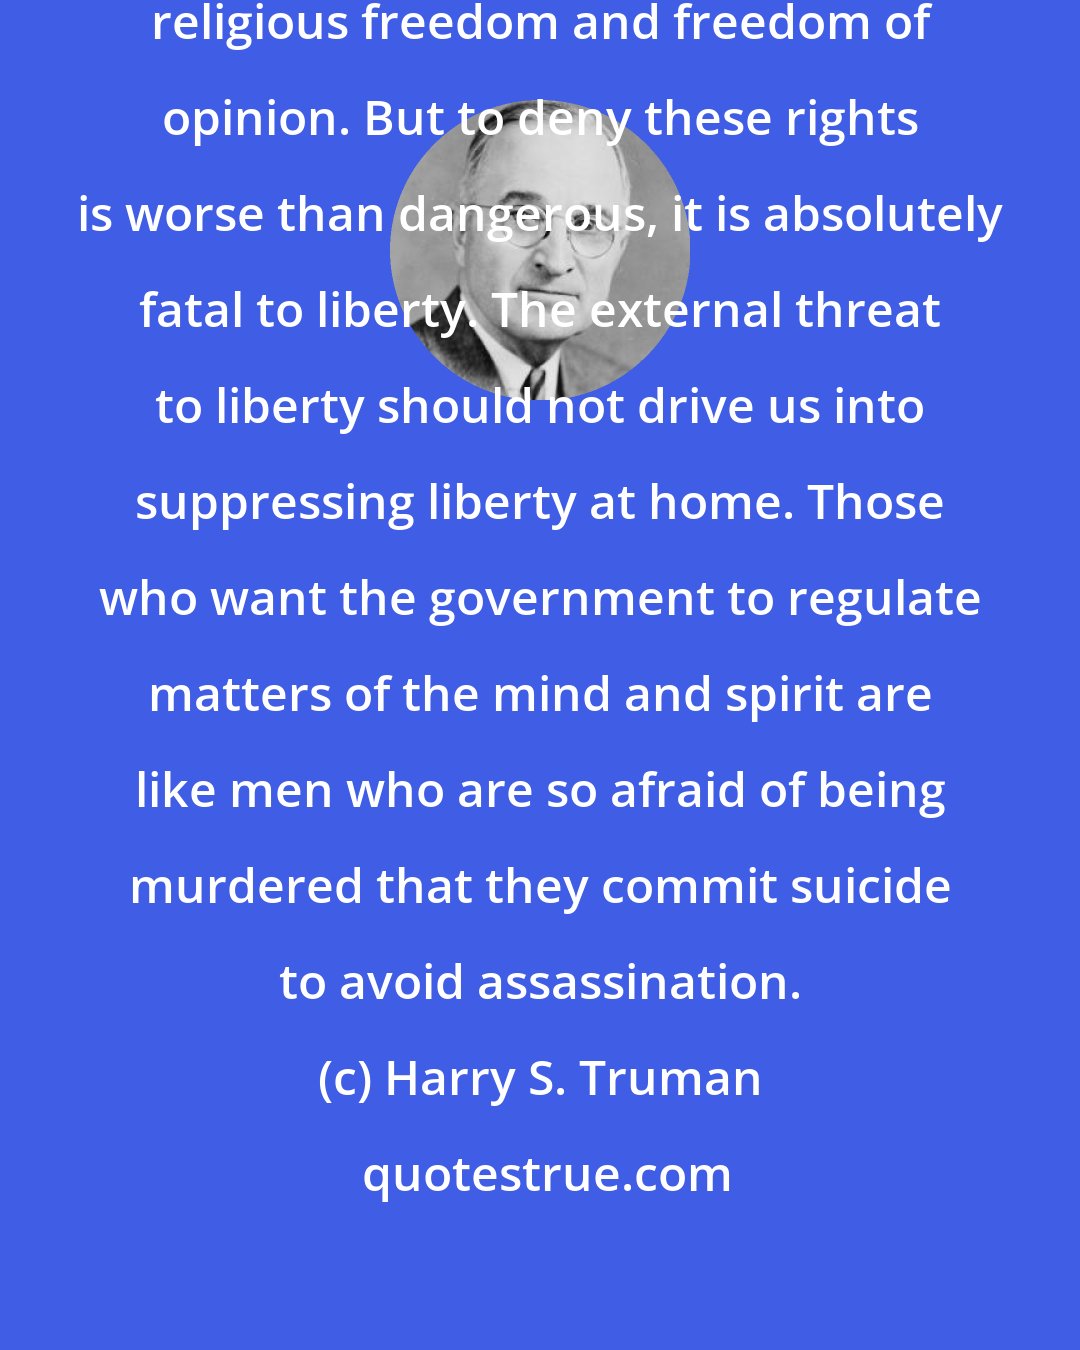 Harry S. Truman: Of course, there are dangers in religious freedom and freedom of opinion. But to deny these rights is worse than dangerous, it is absolutely fatal to liberty. The external threat to liberty should not drive us into suppressing liberty at home. Those who want the government to regulate matters of the mind and spirit are like men who are so afraid of being murdered that they commit suicide to avoid assassination.